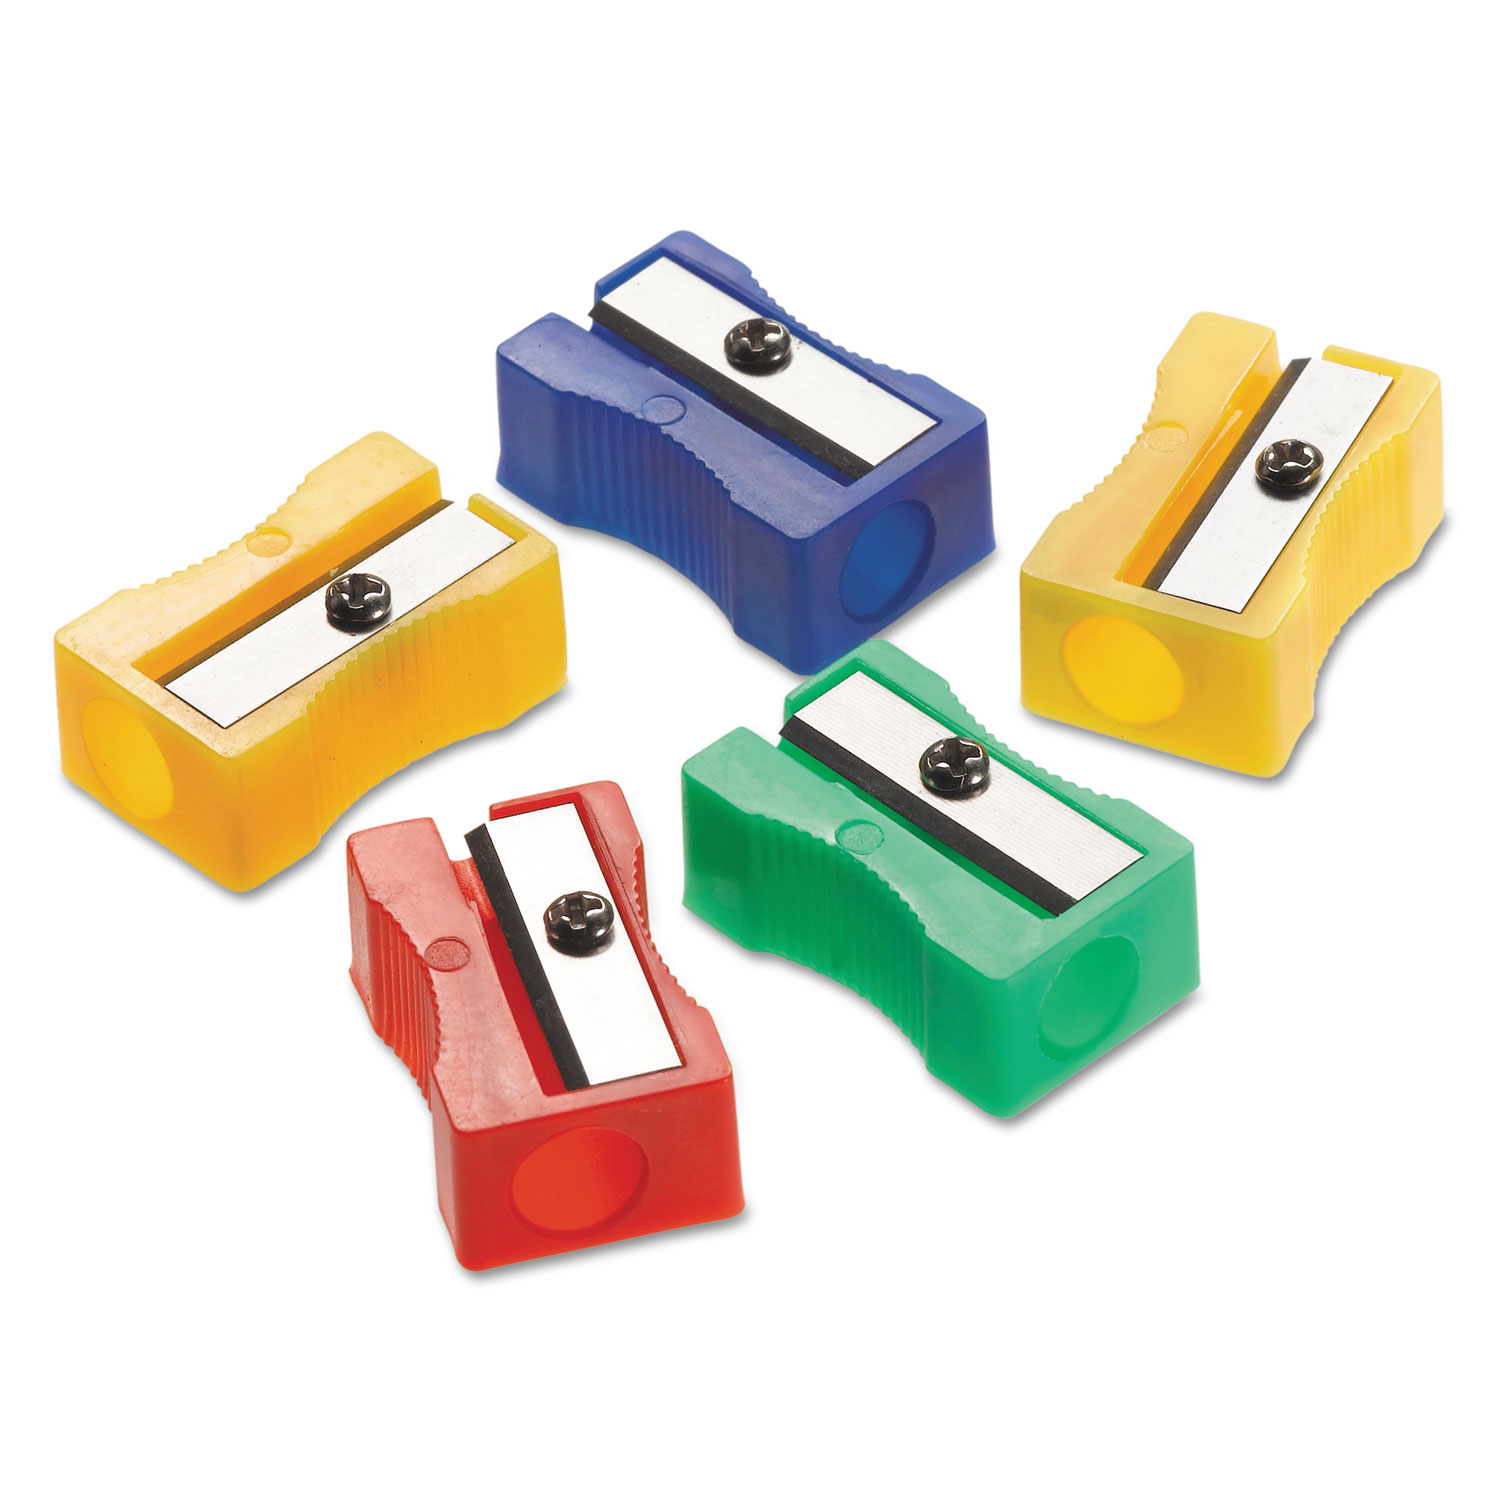  Westcott 15993 One-Hole Manual Pencil Sharpeners, 4 x 2 x 1, Assorted Colors, 24/Pack (ACM15993) 